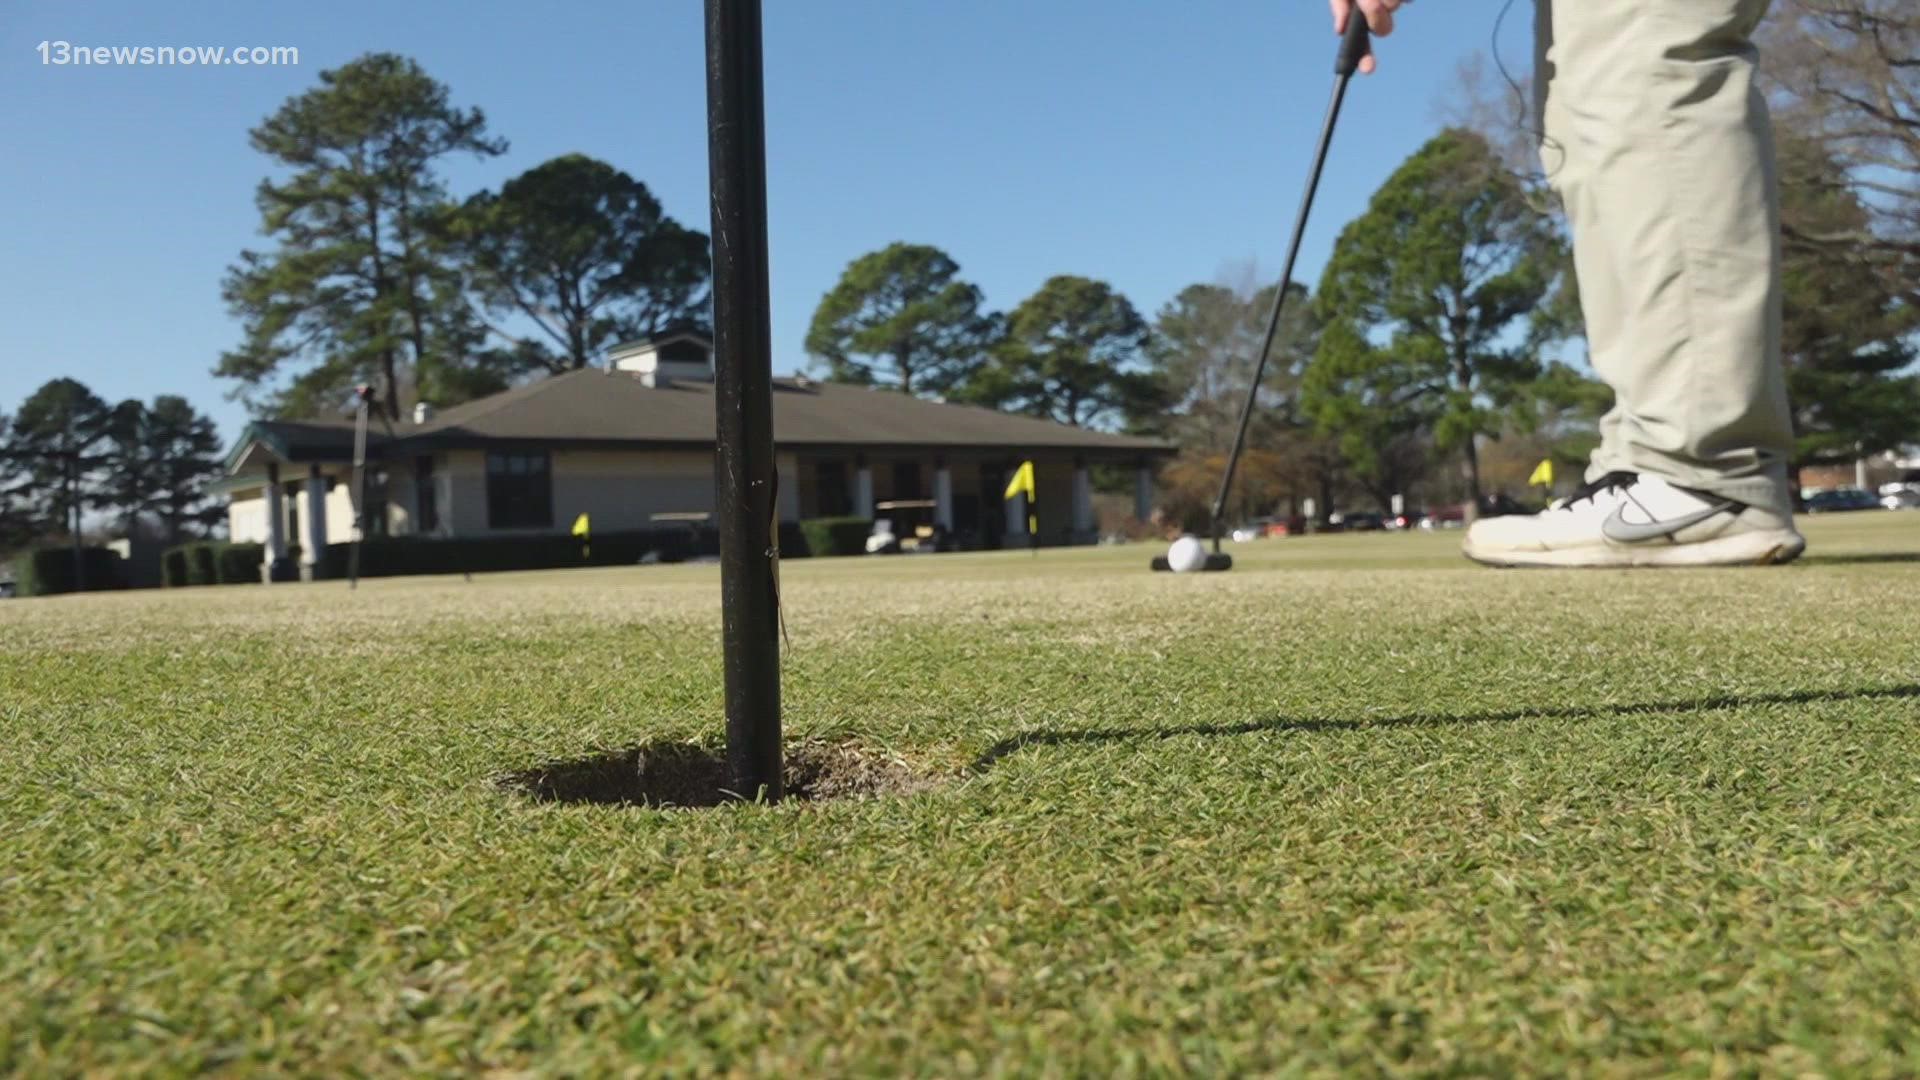 The Lambert's Point Golf Course Norfolk is shutting down. Hampton Roads Sanitation District bought the property for $30 million to build another facility.